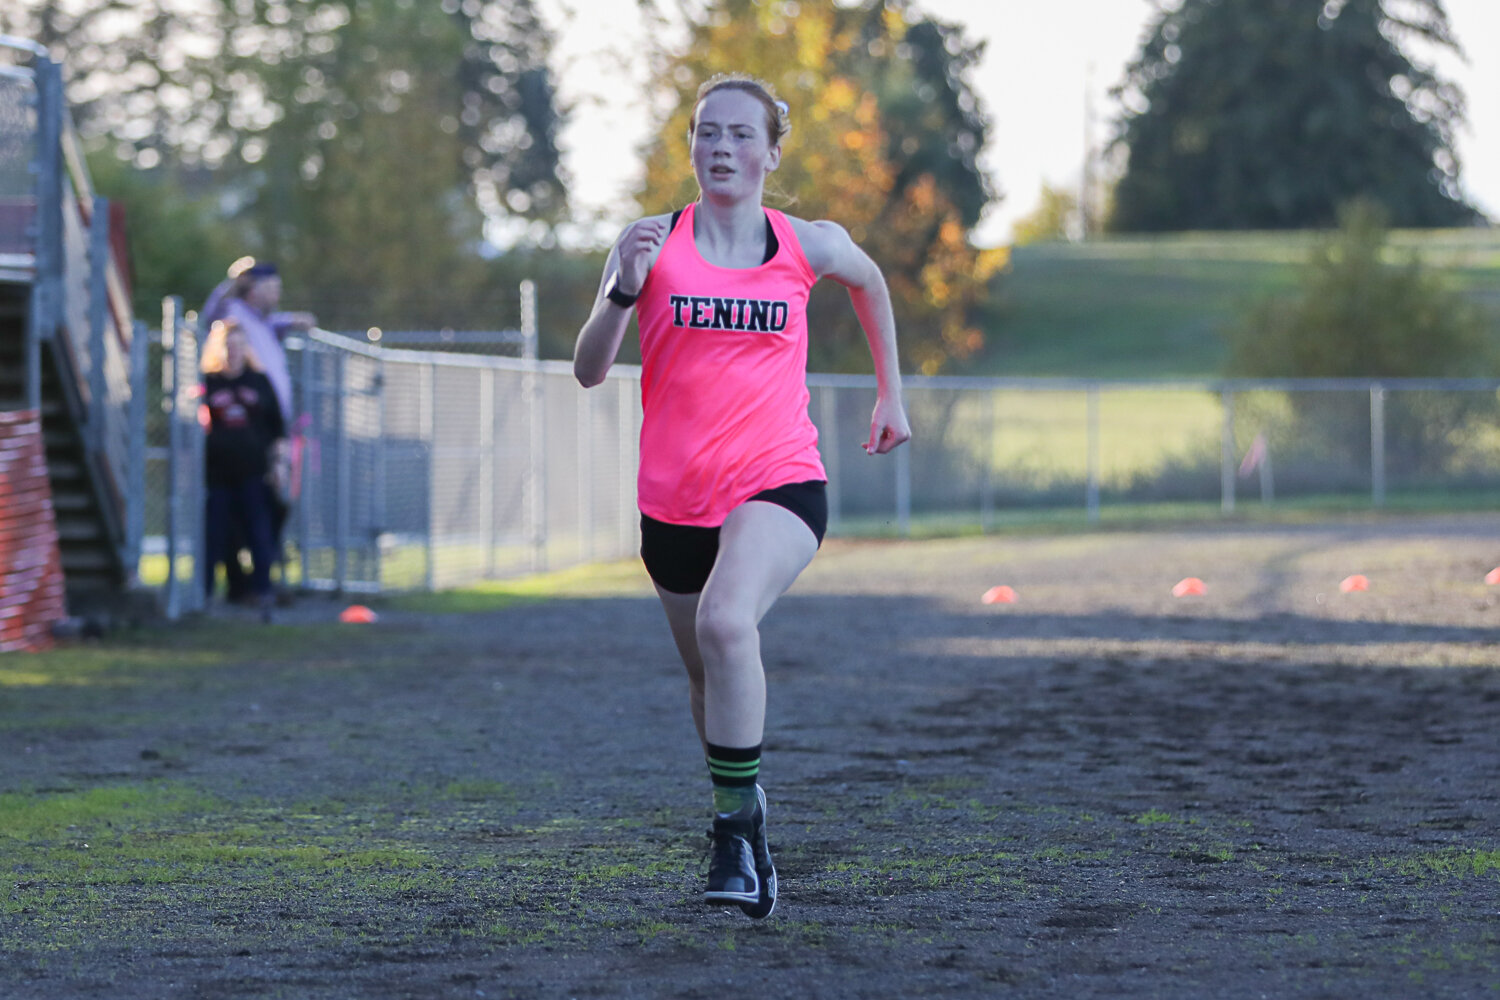 Tenino's Brynn Williams takes first in the girls race at a cross country meet in Toledo on Oct. 12.